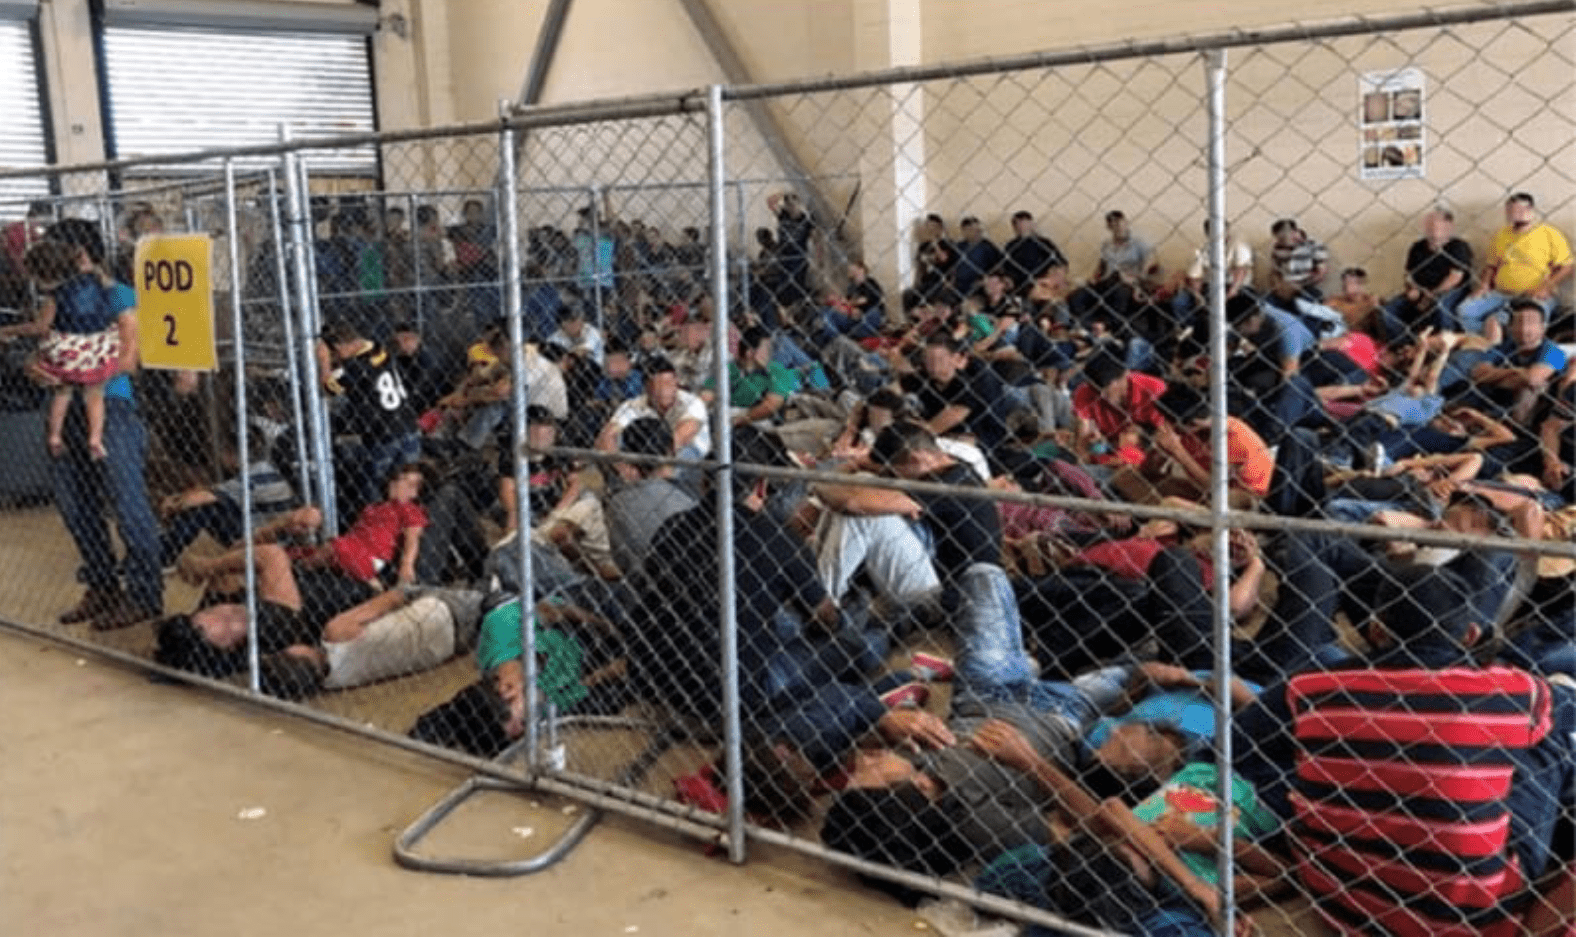 photo: DHS Office of Inspector General, June 10 2019